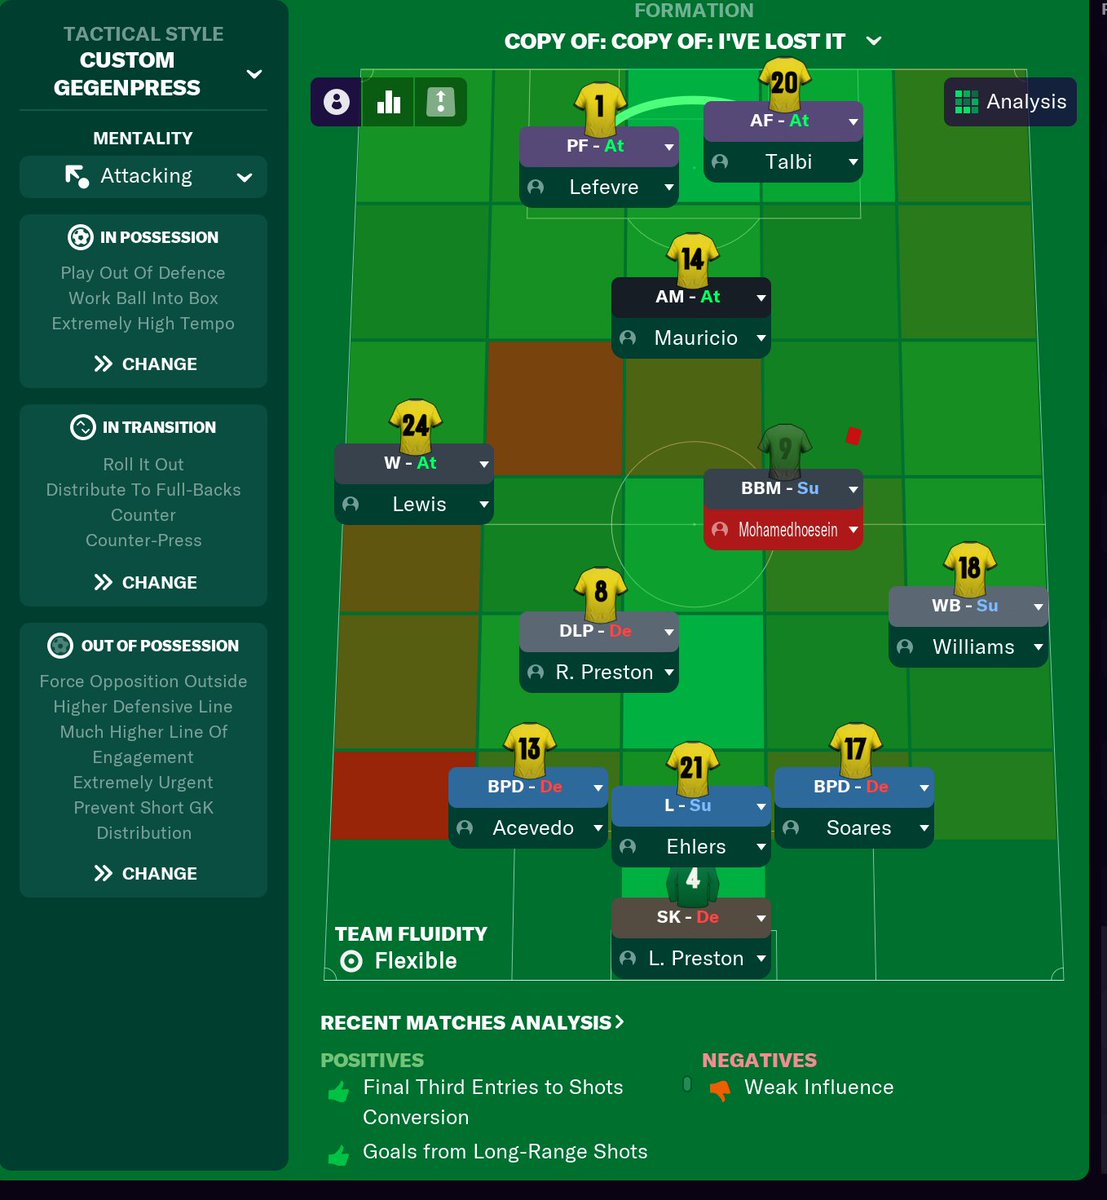 Thought I'd try out a new tactic for the final Champions League game that didn't matter. Borussia Dortmund 0-9 Harrogate.